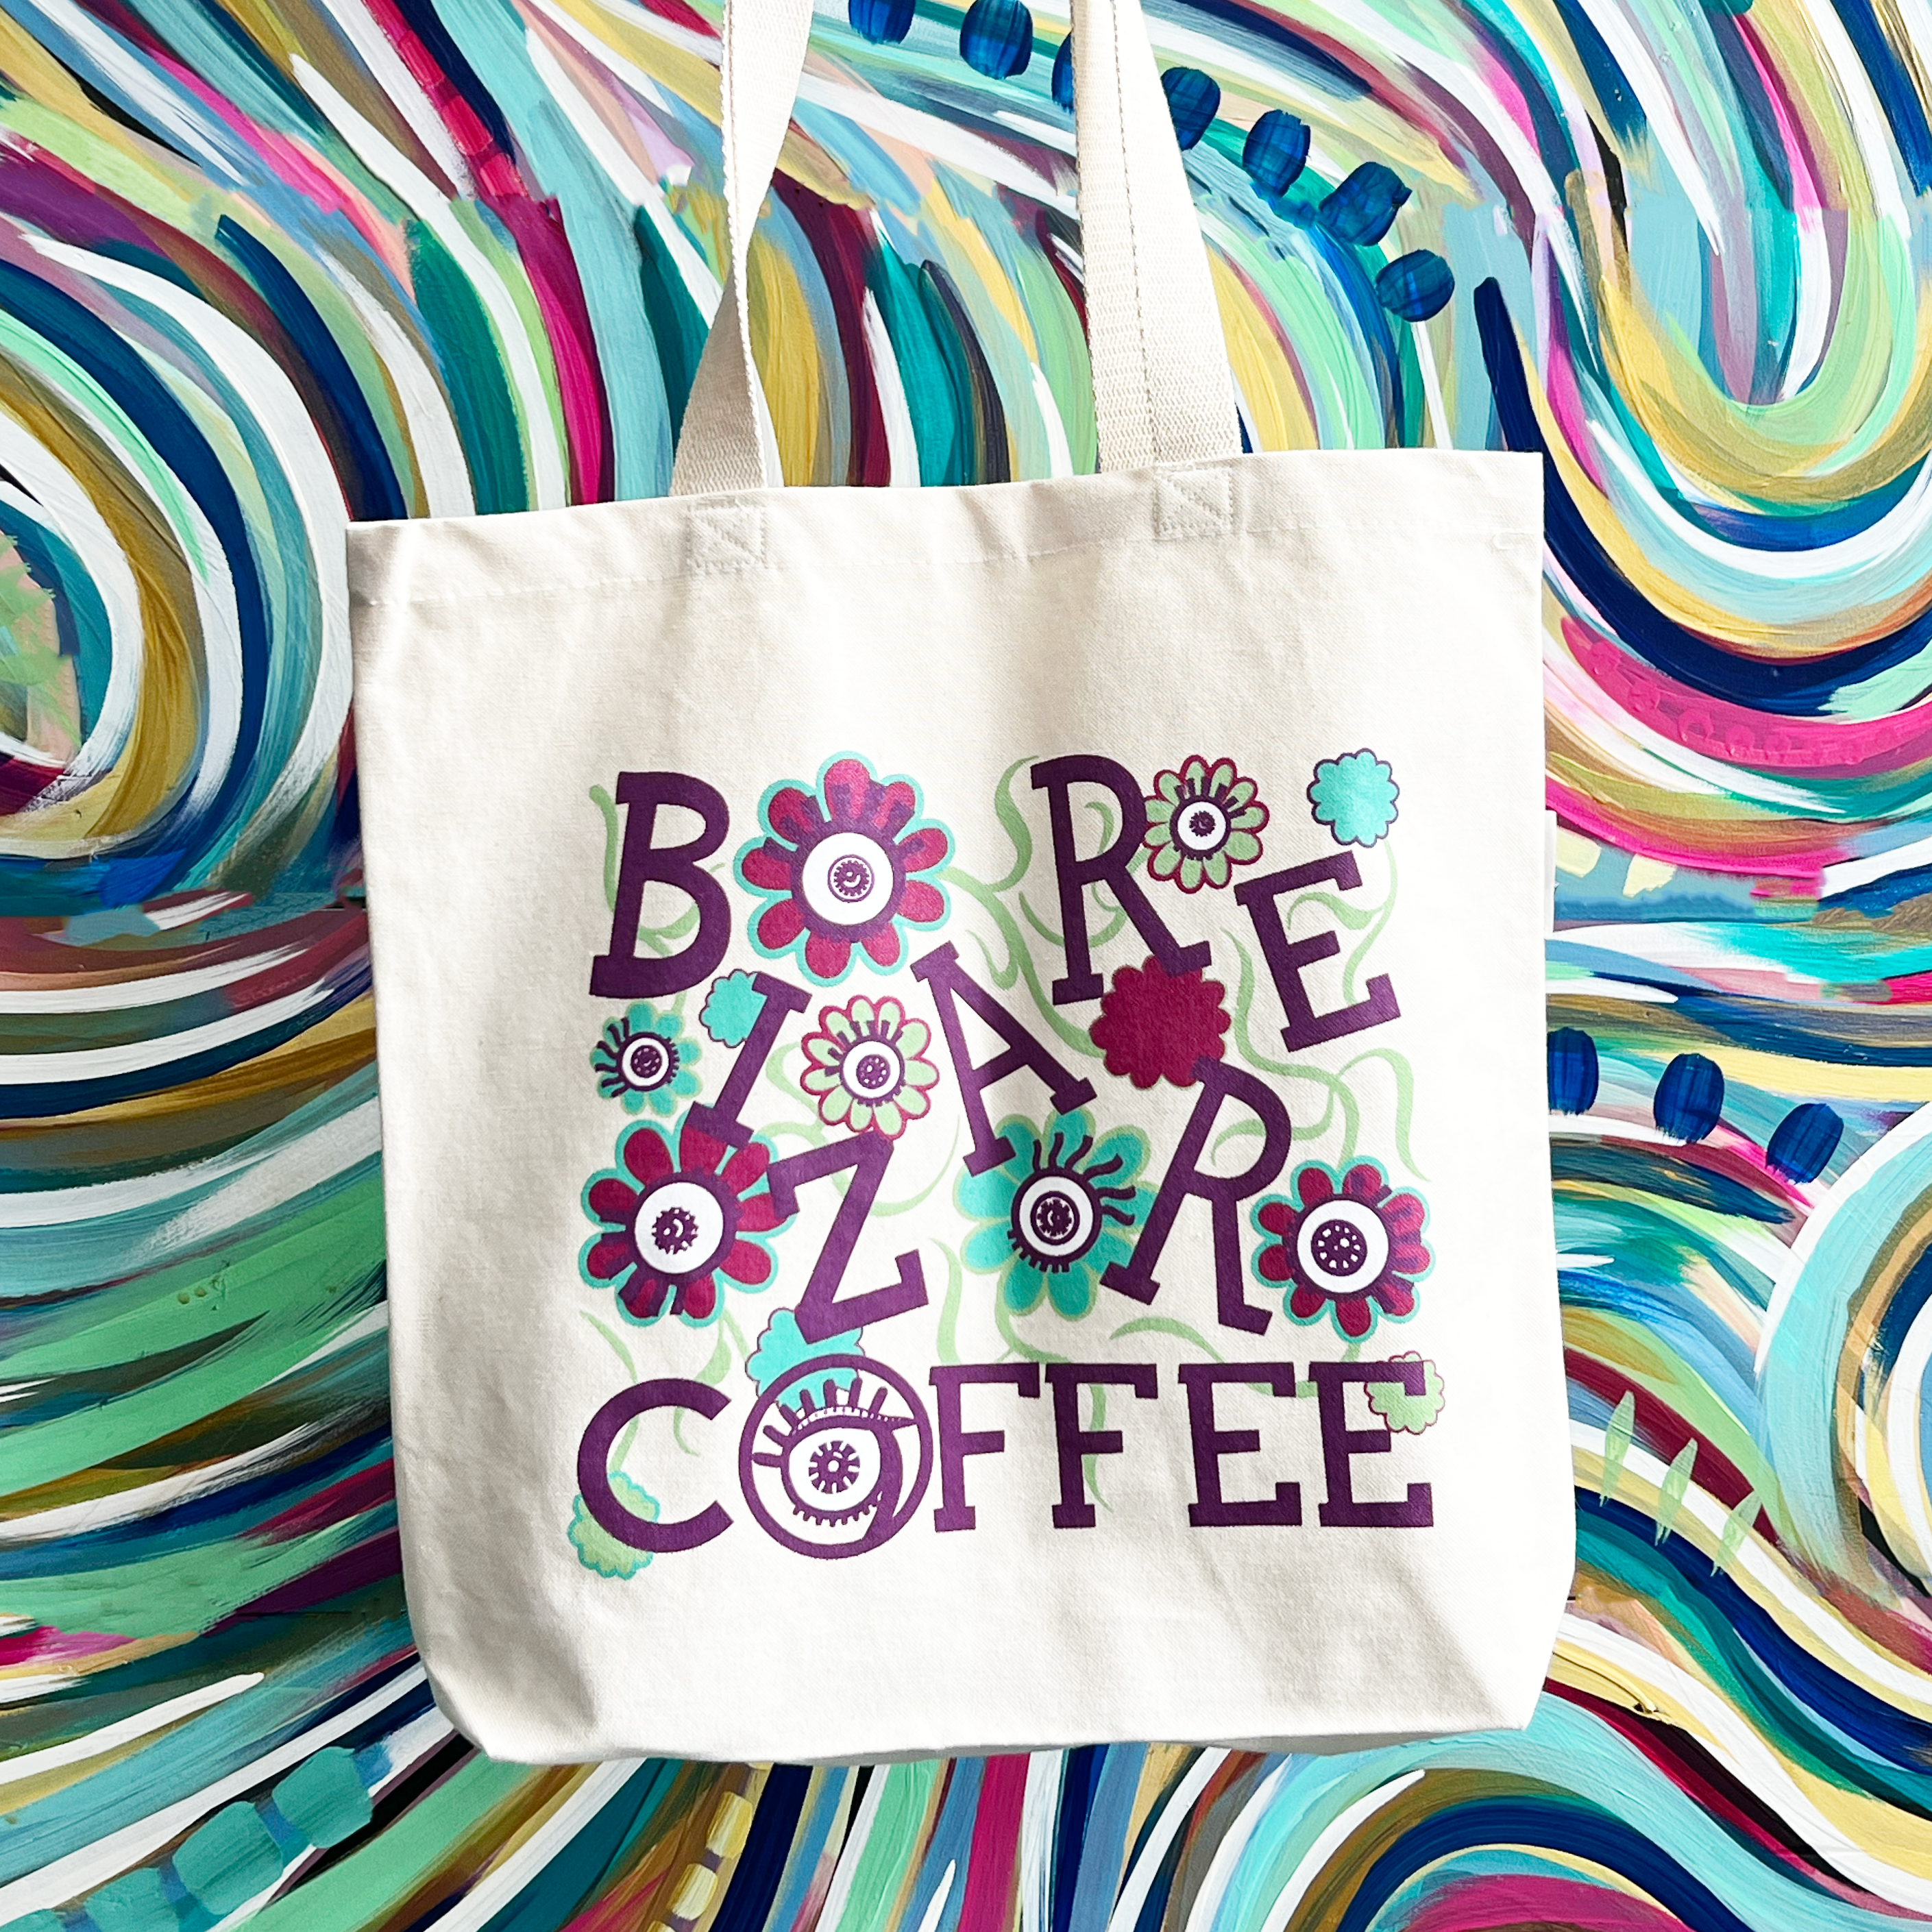 A canvas tote bag that says Bizarre Coffee in purple letters with flowers and eyes.